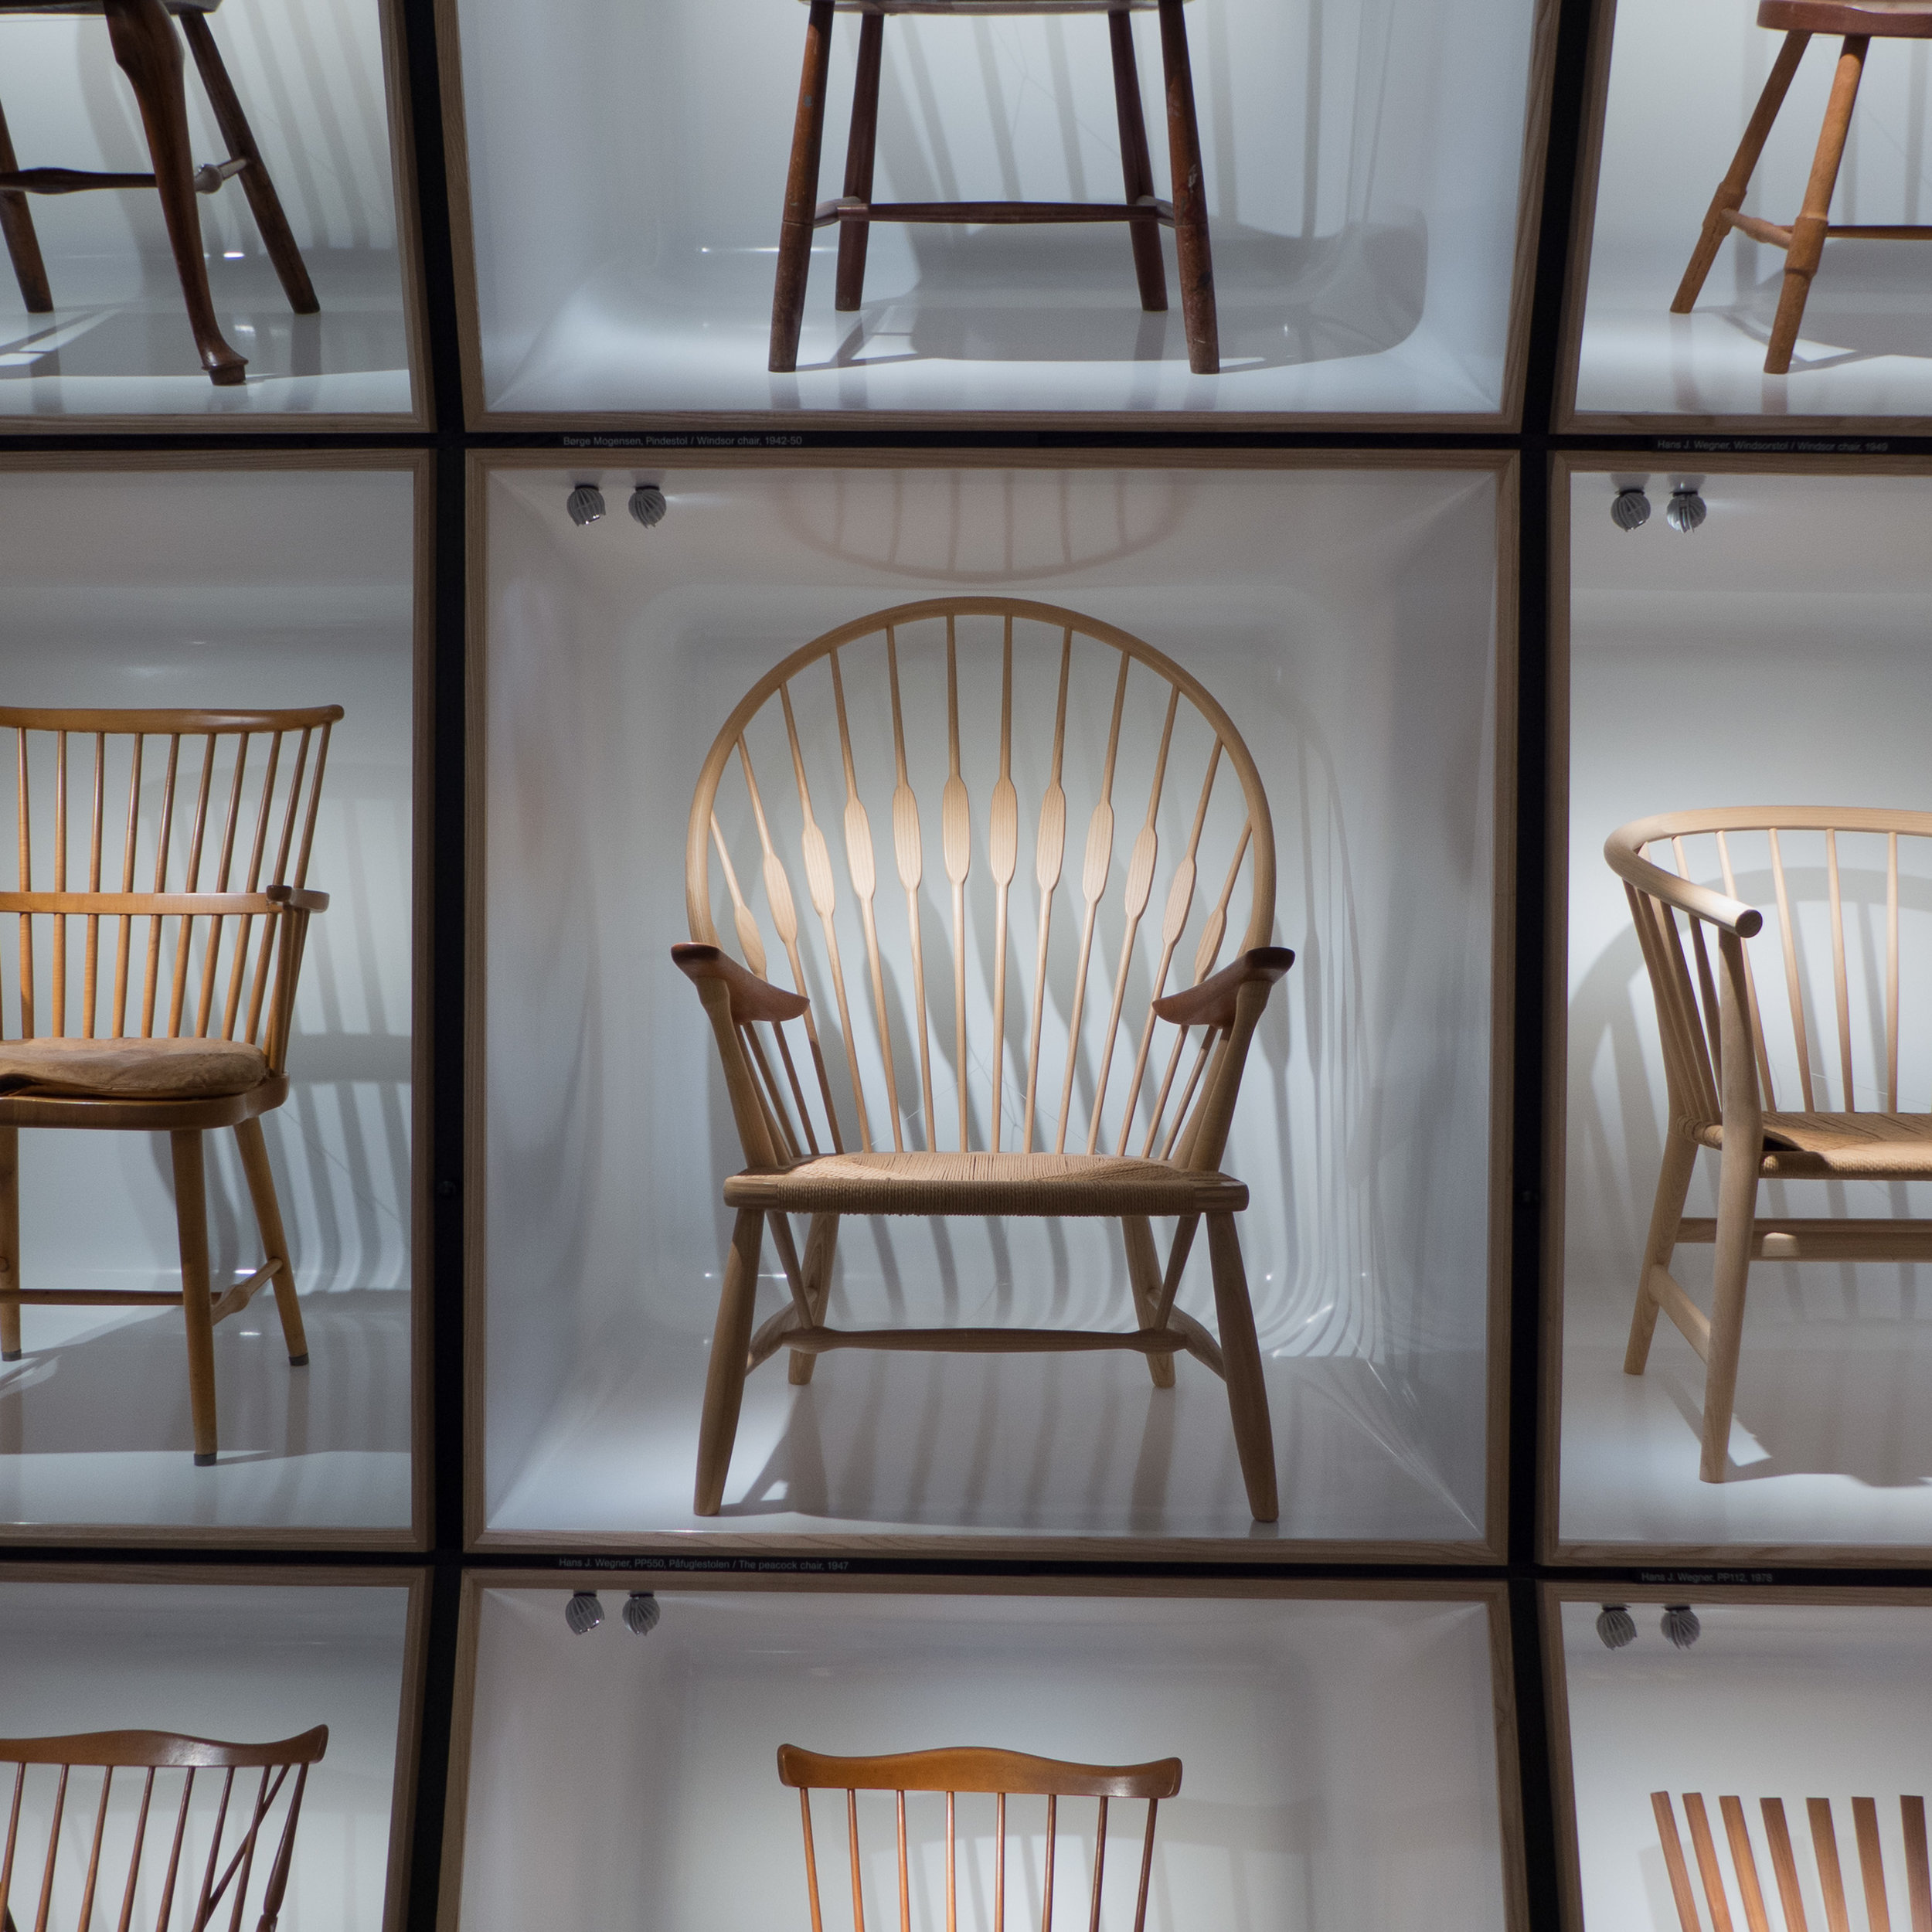 The Danish Chair — danish architecture and design review